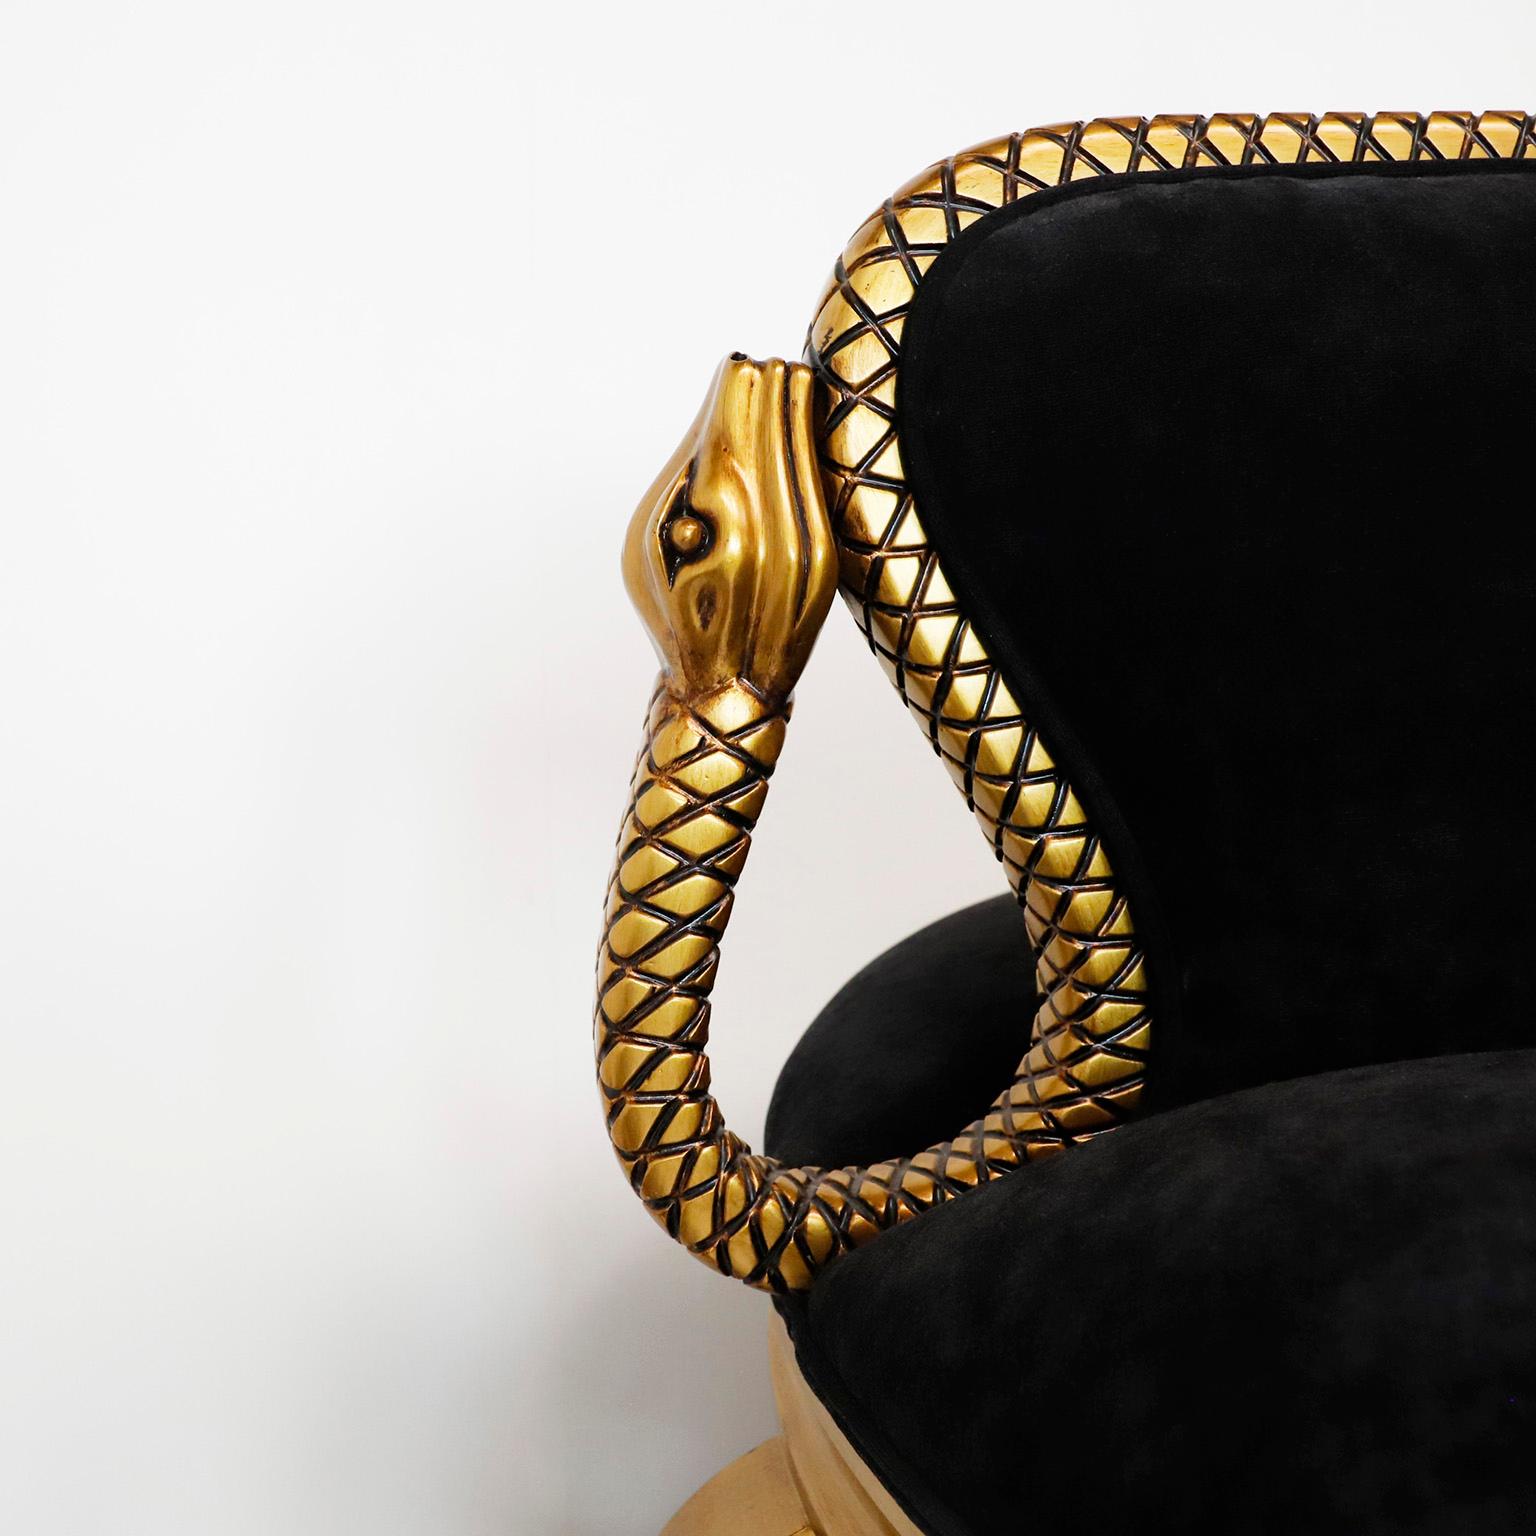 Late 20th Century Round Seat for 3 People with Snake-Shaped Details